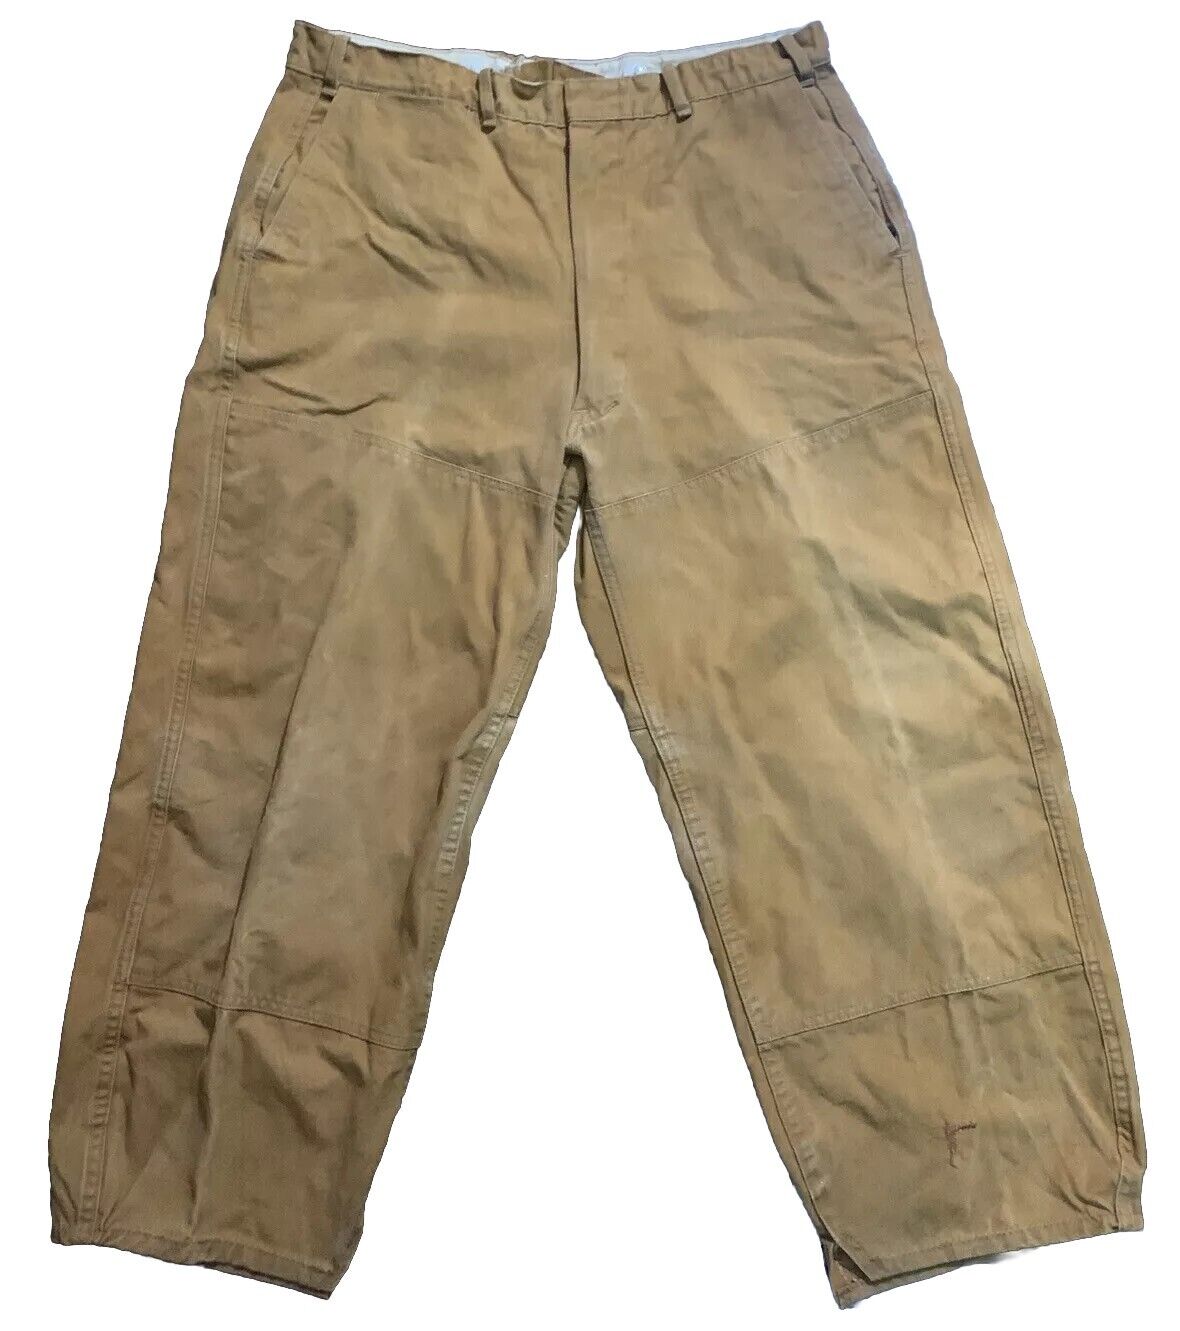 Vtg Hinson Bodyguard Duck Canvas Field Pants 30s 40s 50s Mens Size 34 Hunting